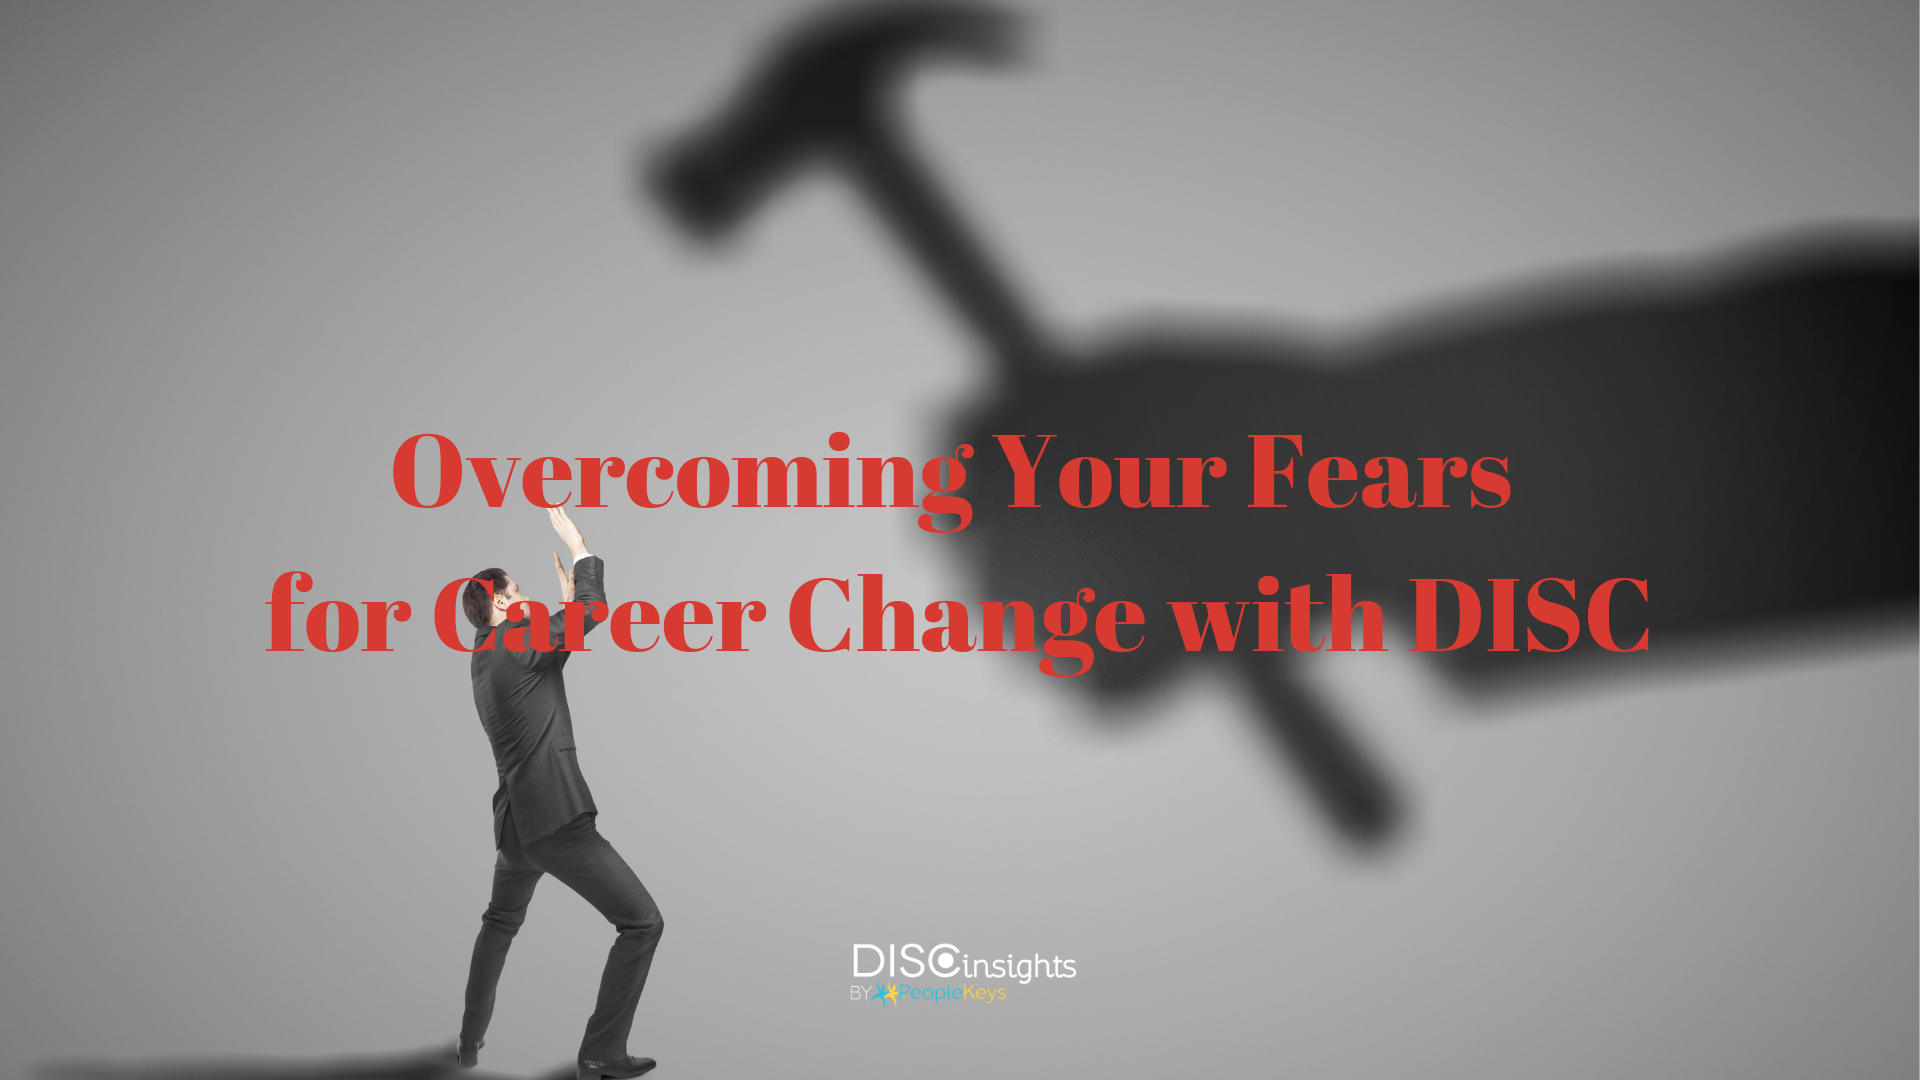 Overcoming Your Fears for Career Change with DISC